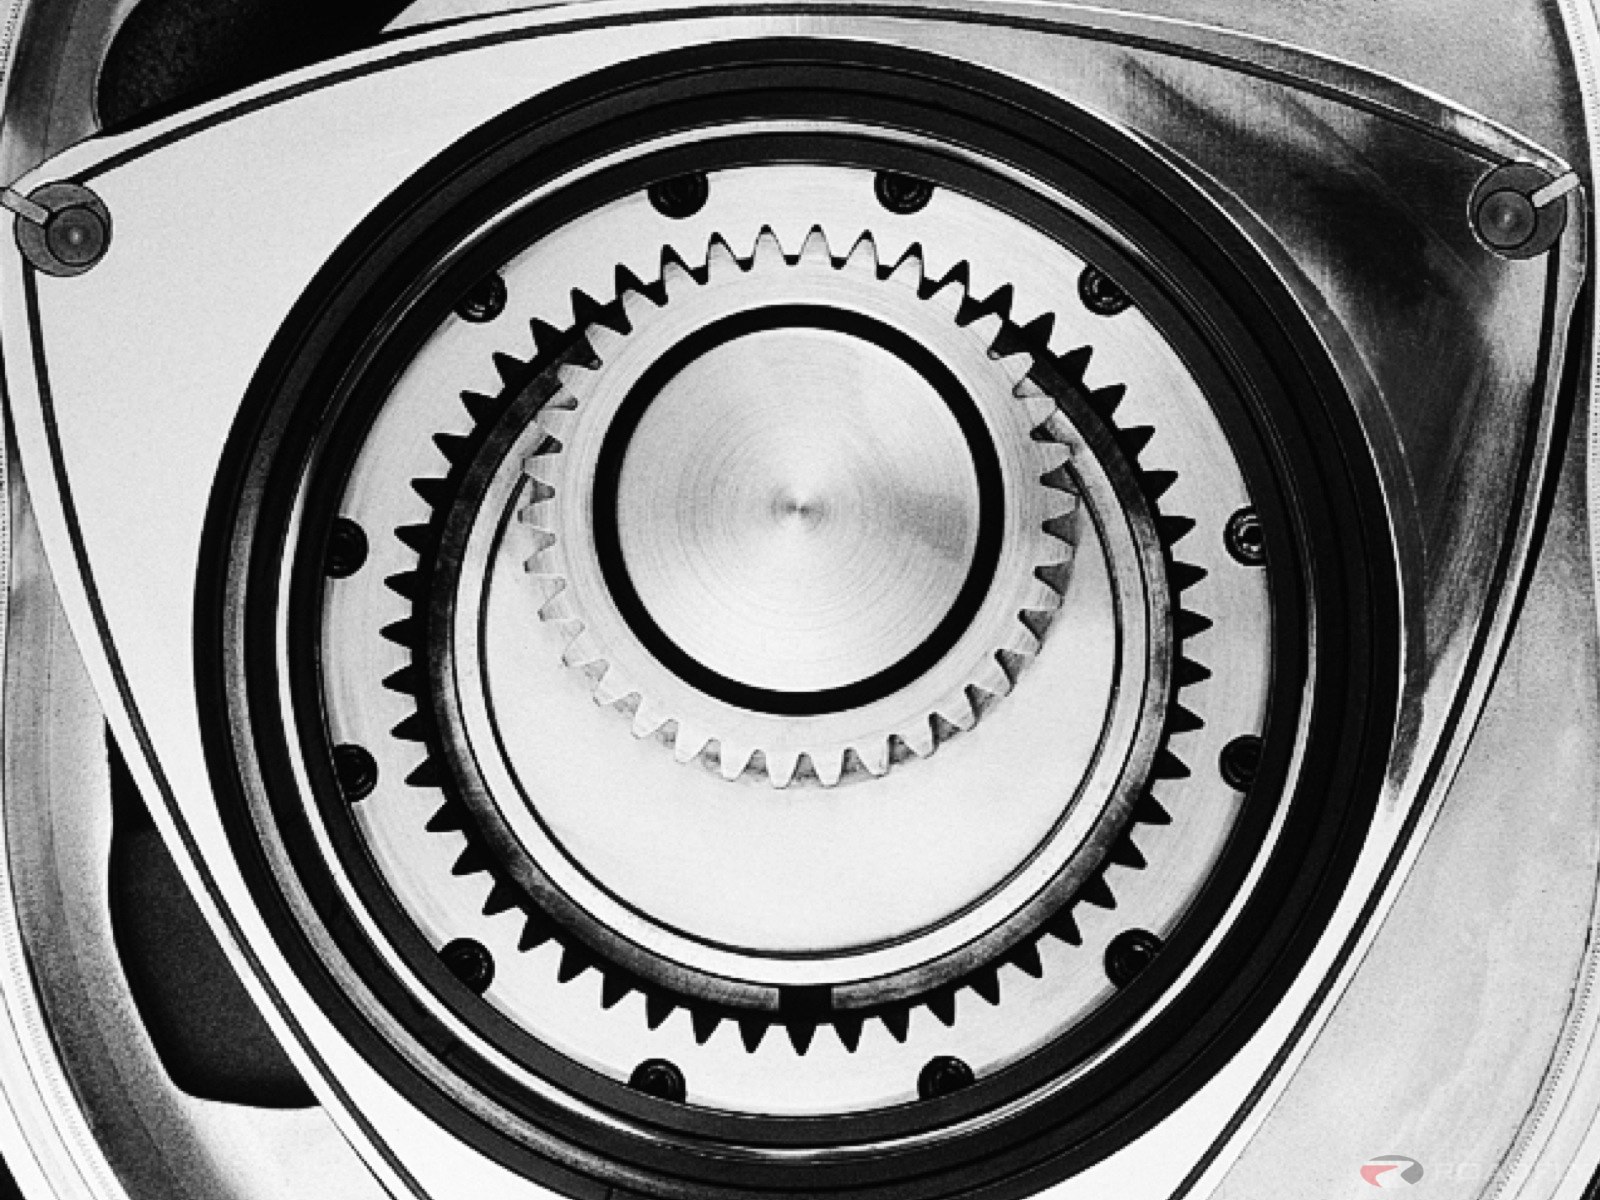 THE WANKEL ROTARY COMBUSTION ENGINE | Innovatize